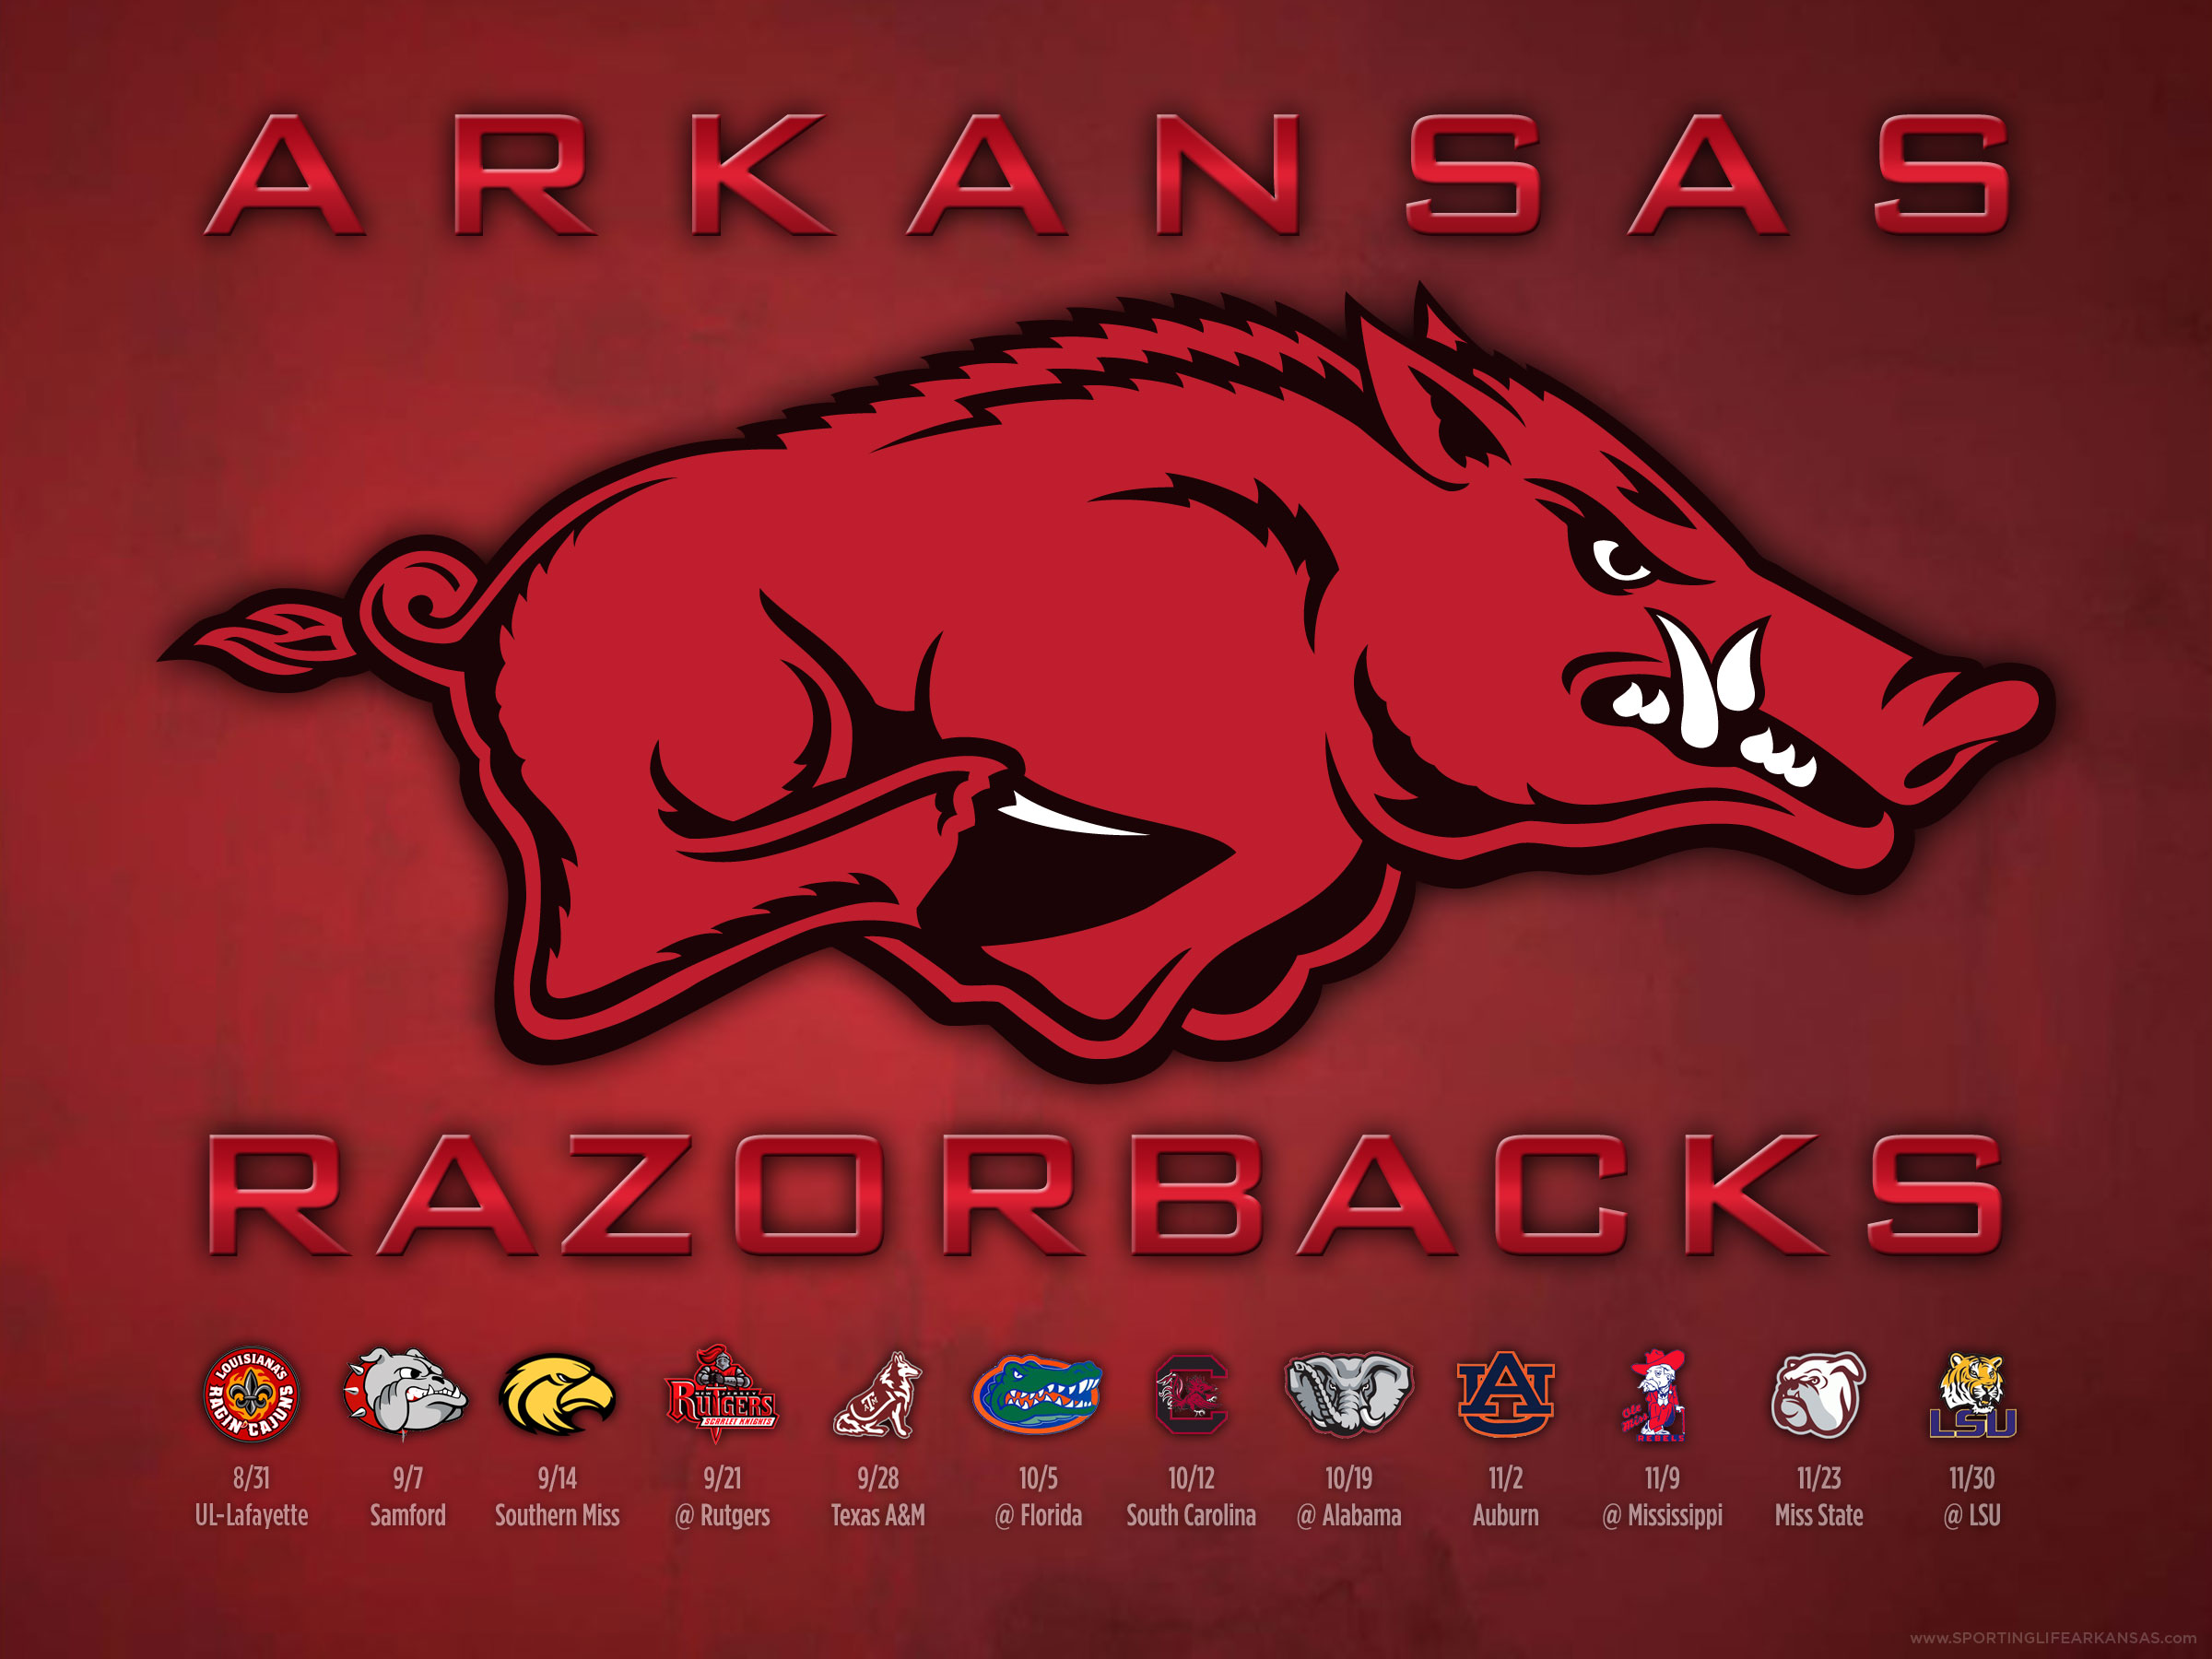 Arkansas Colleges Football Schedules for 2013   Sporting Life Arkansas  nebraska football schedule background